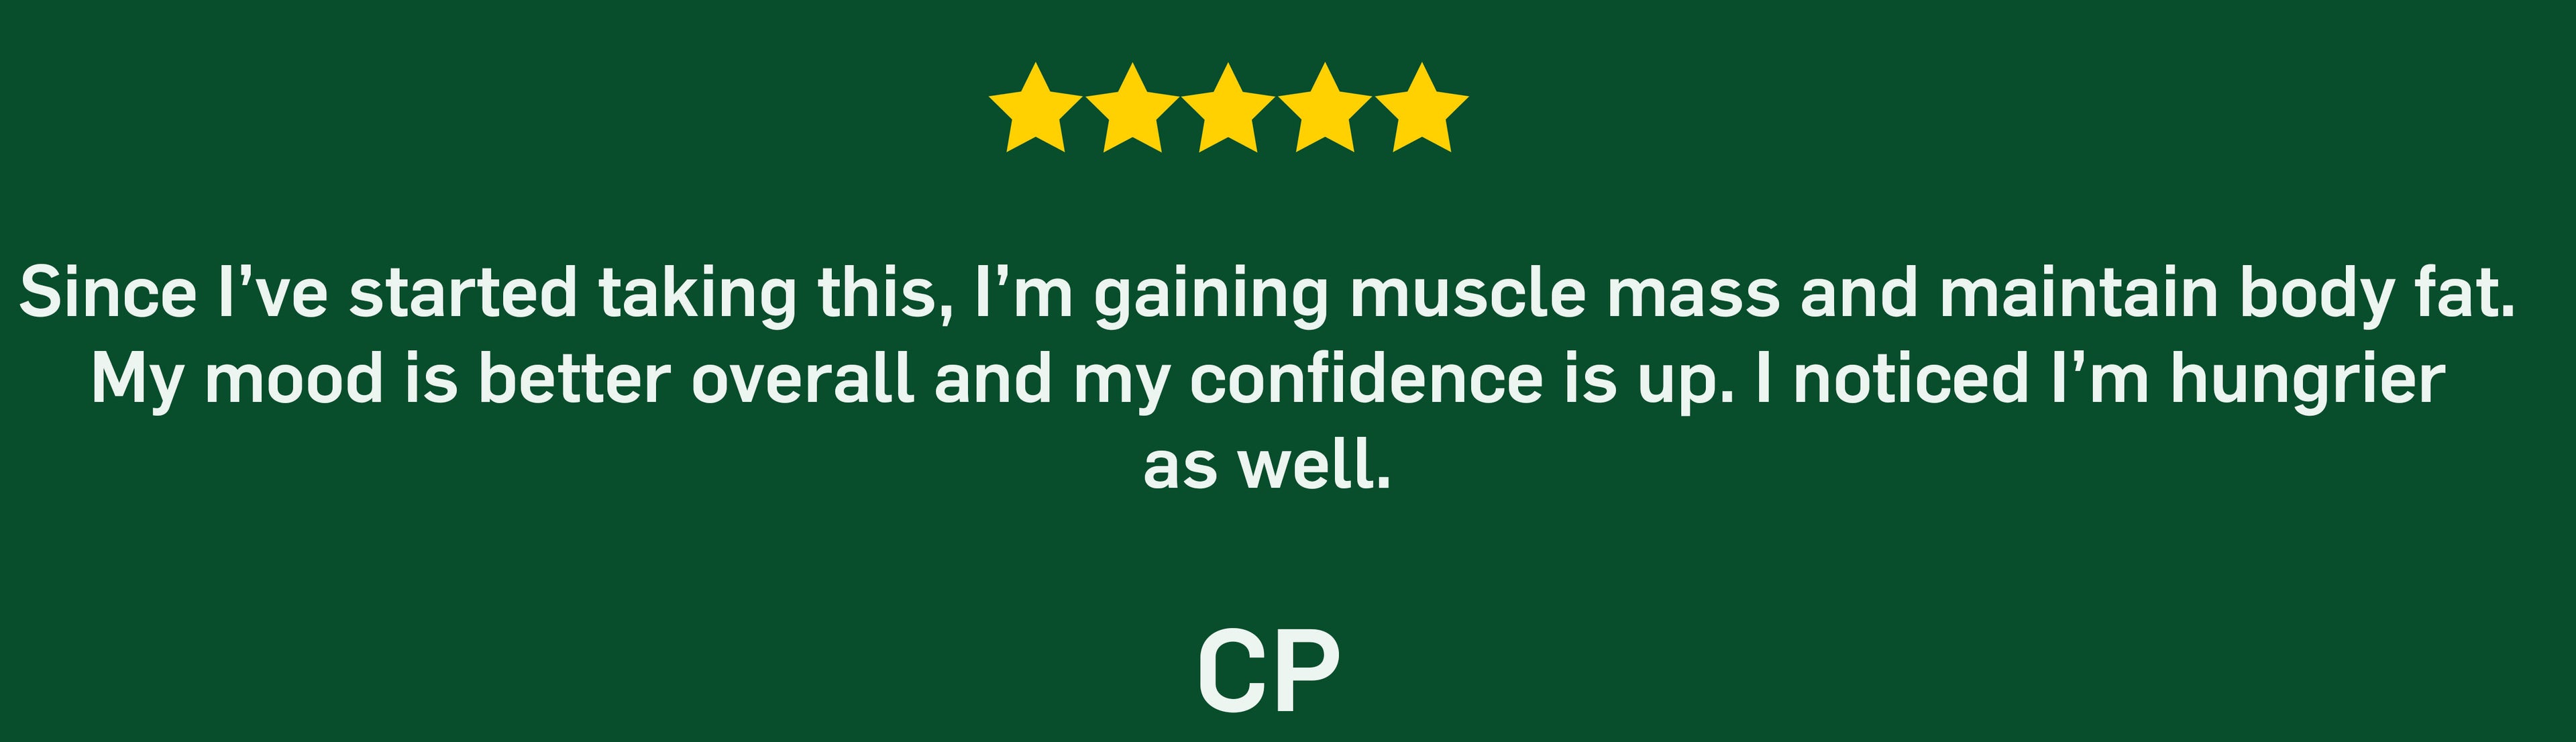 positive customer review from CP